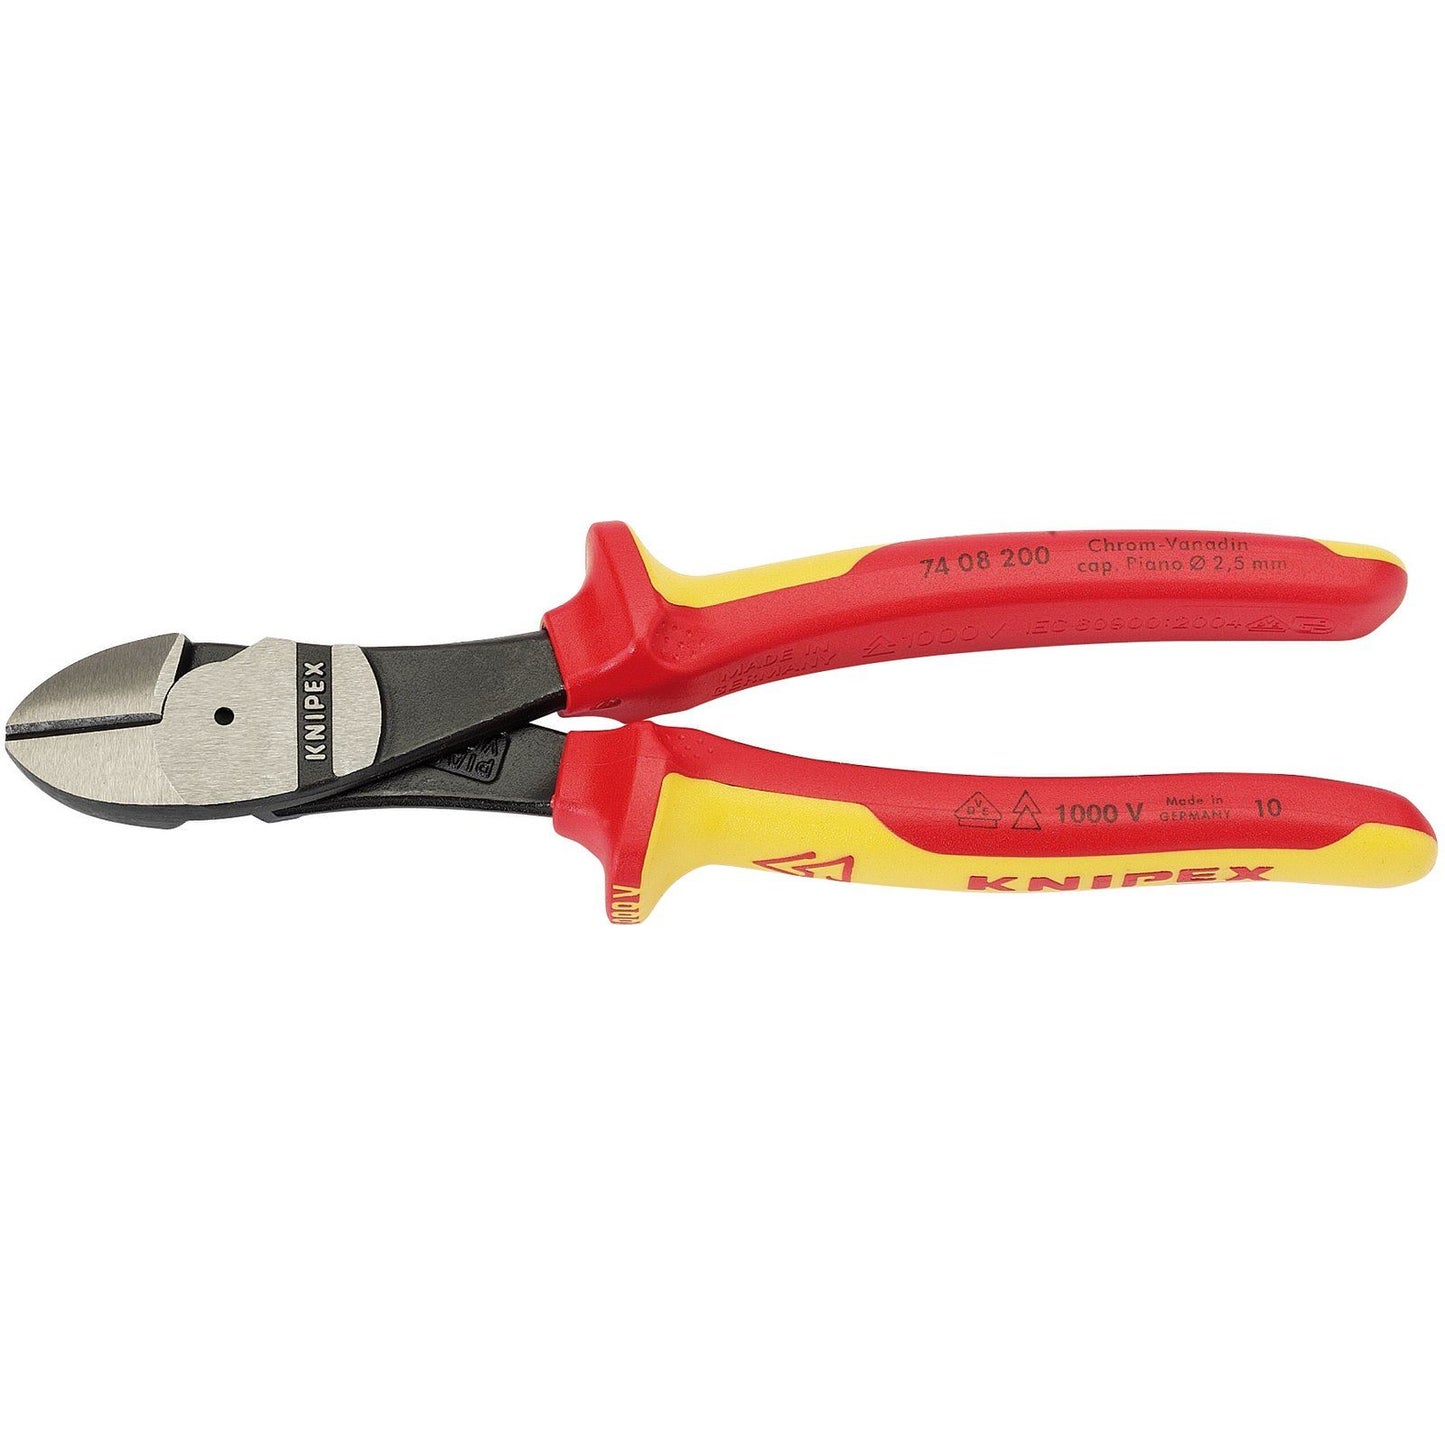 Knipex 74 08 200 VDE 1000v Insulated Large Side Cutters 200mm Part No. 31929